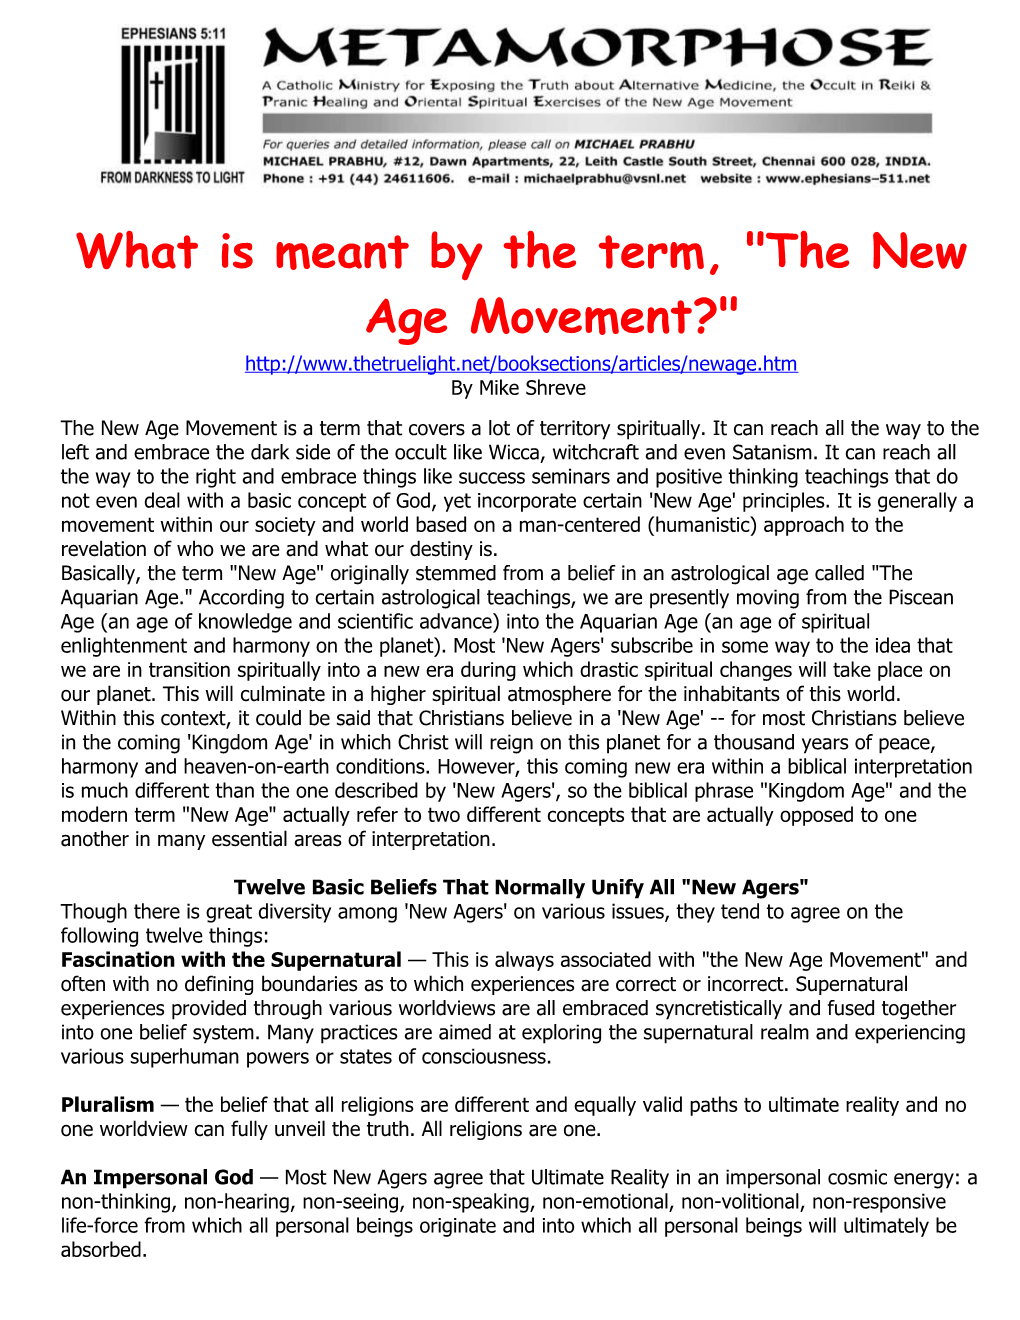 What Is Meant by the Term, the New Age Movement?